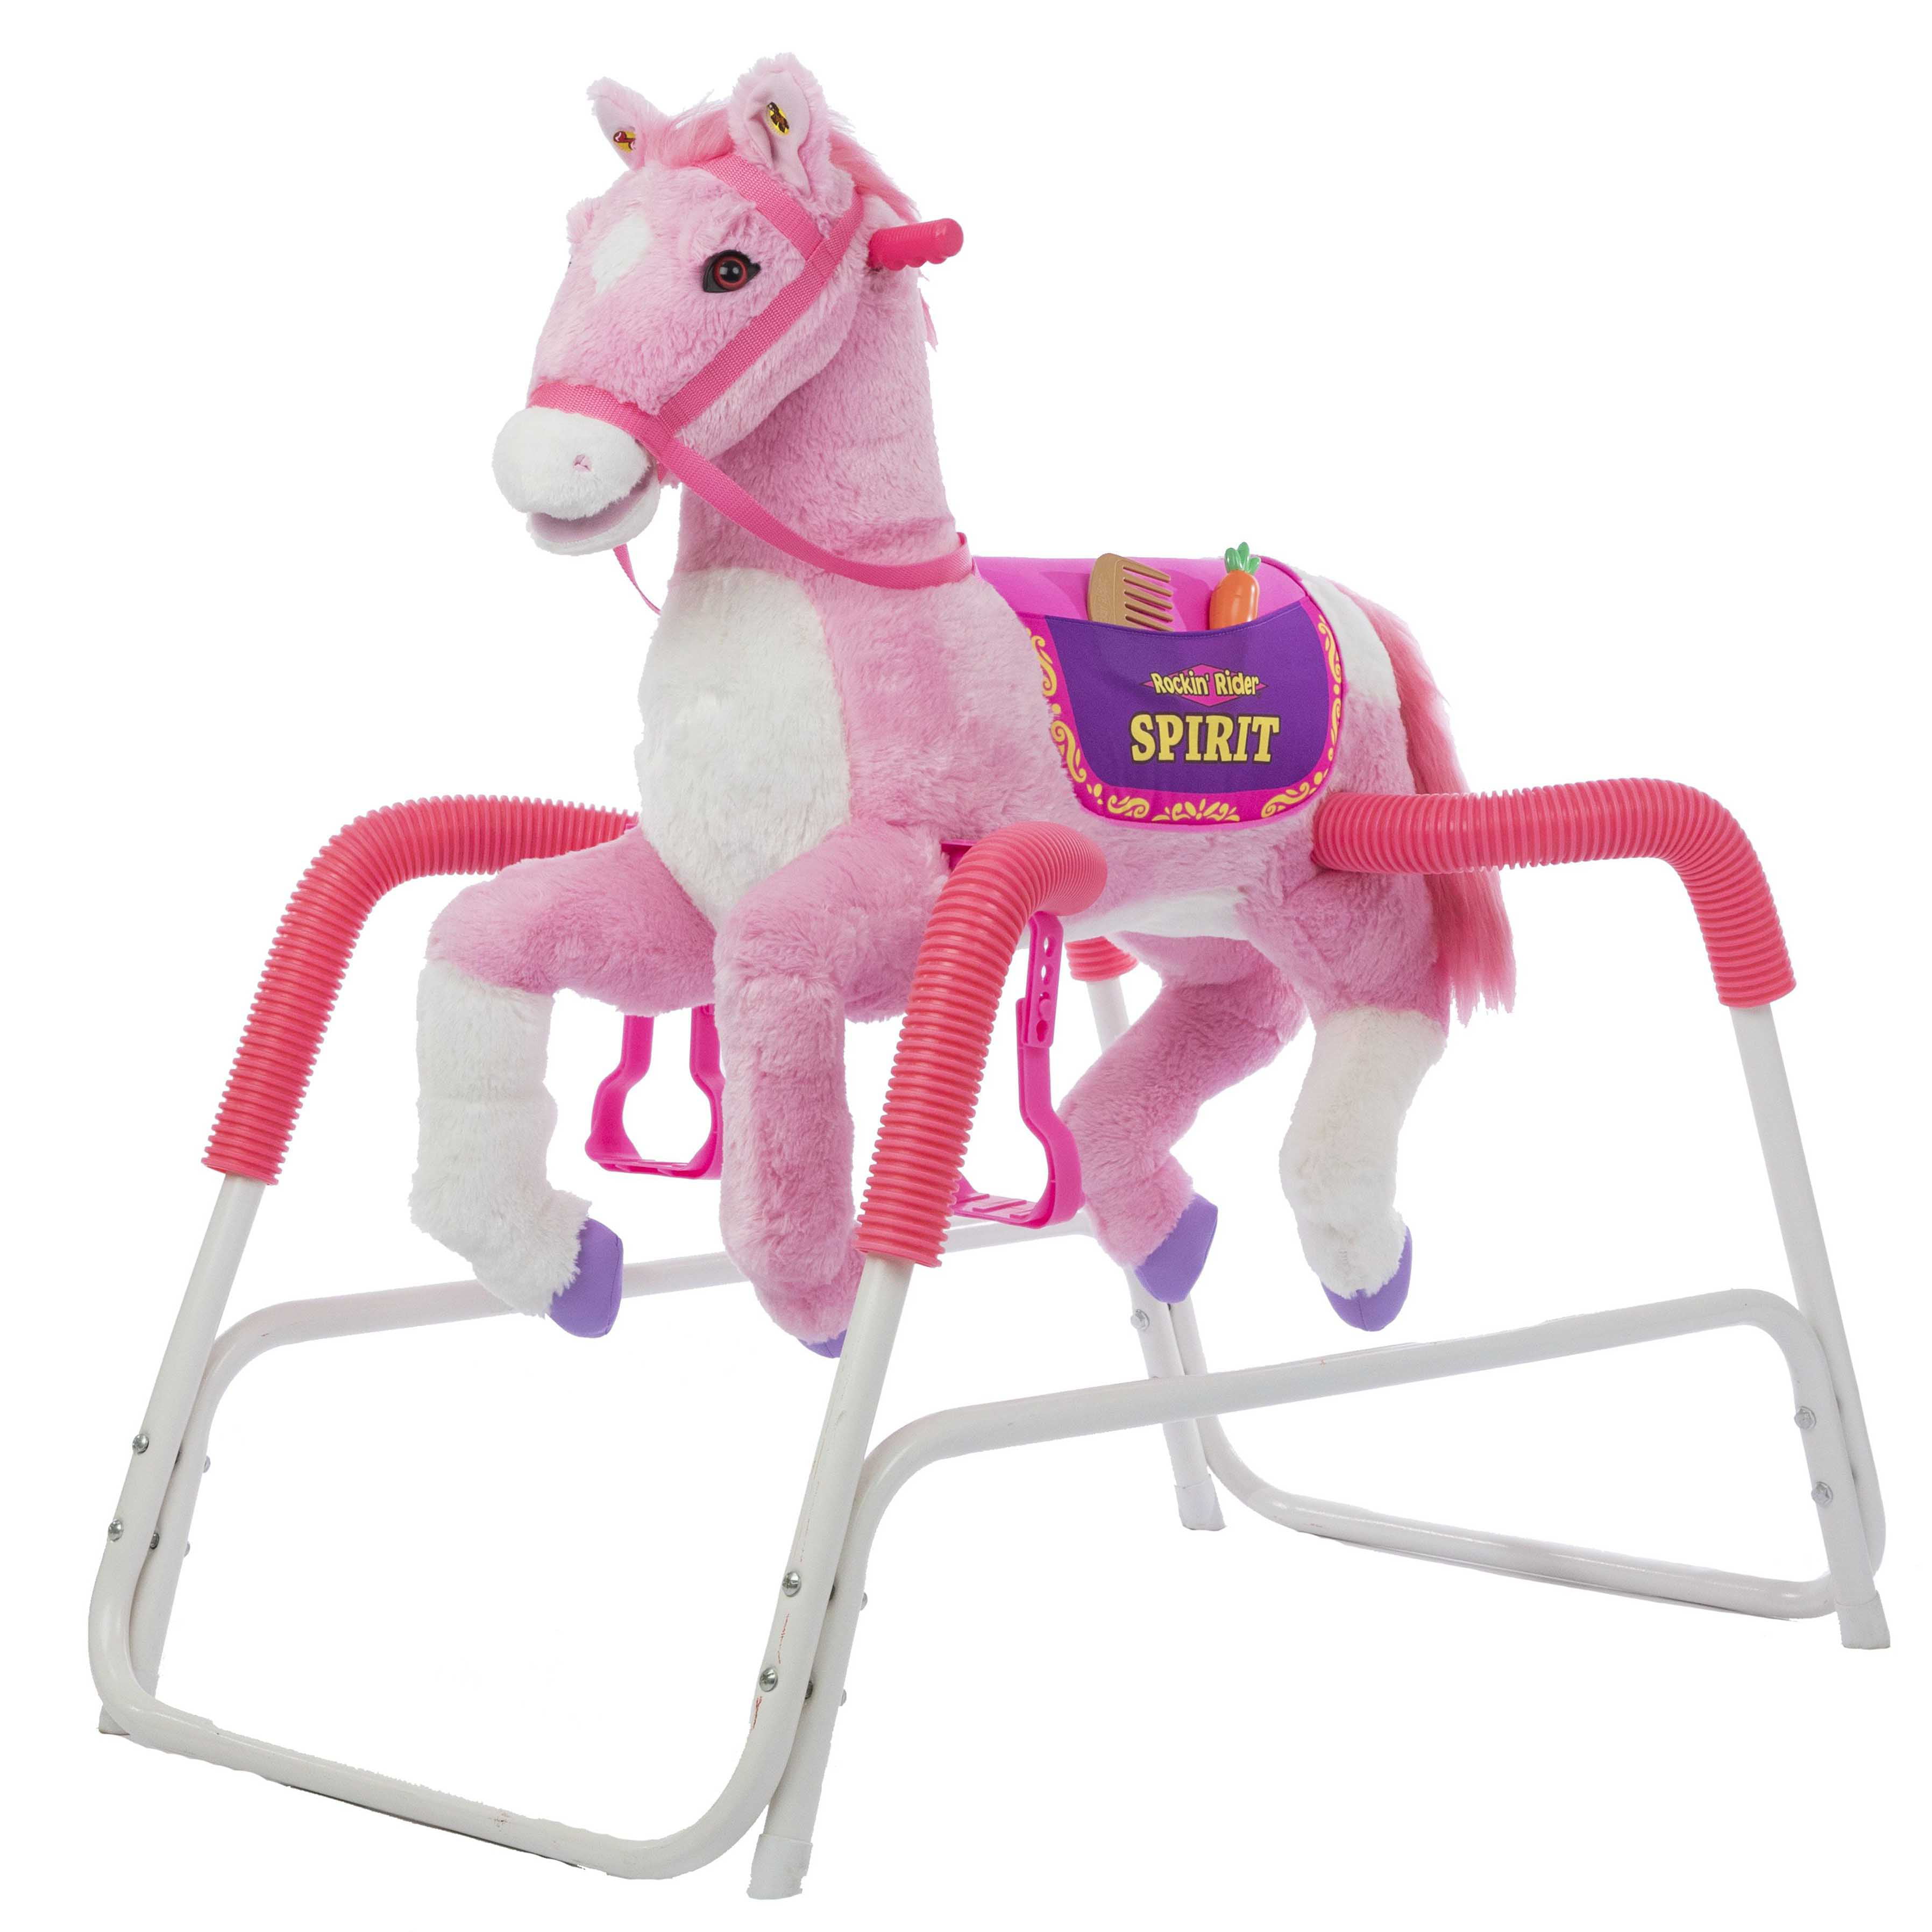 Rockin' Rider Legend Animated Plush Spring Horse 2 Day for sale online